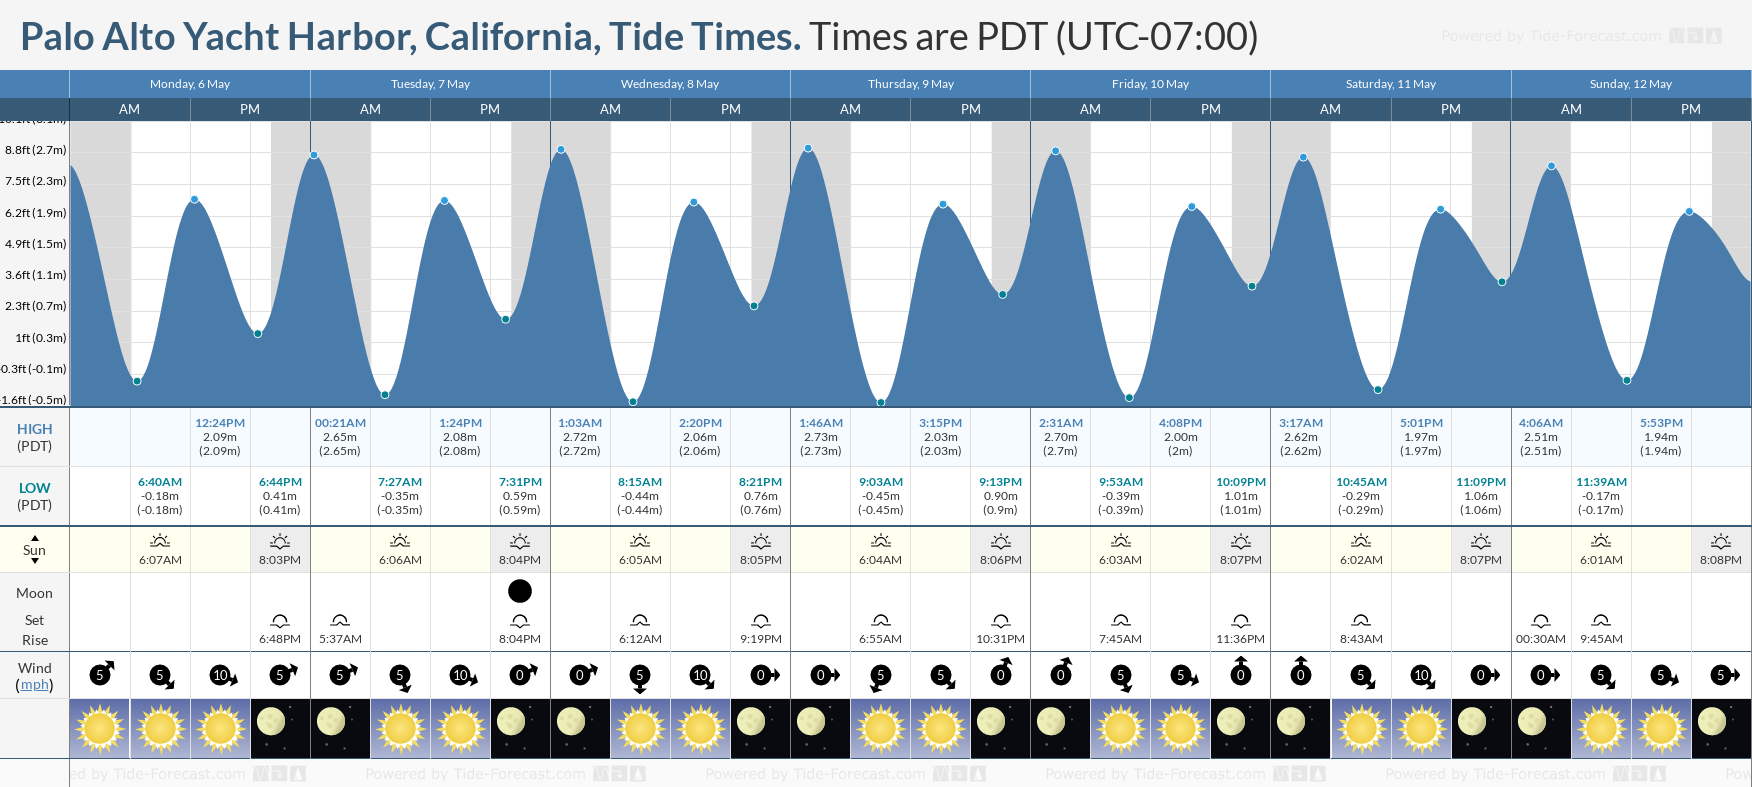 Palo Alto Yacht Harbor, California Tide Chart including high and low tide tide times for the next 7 days